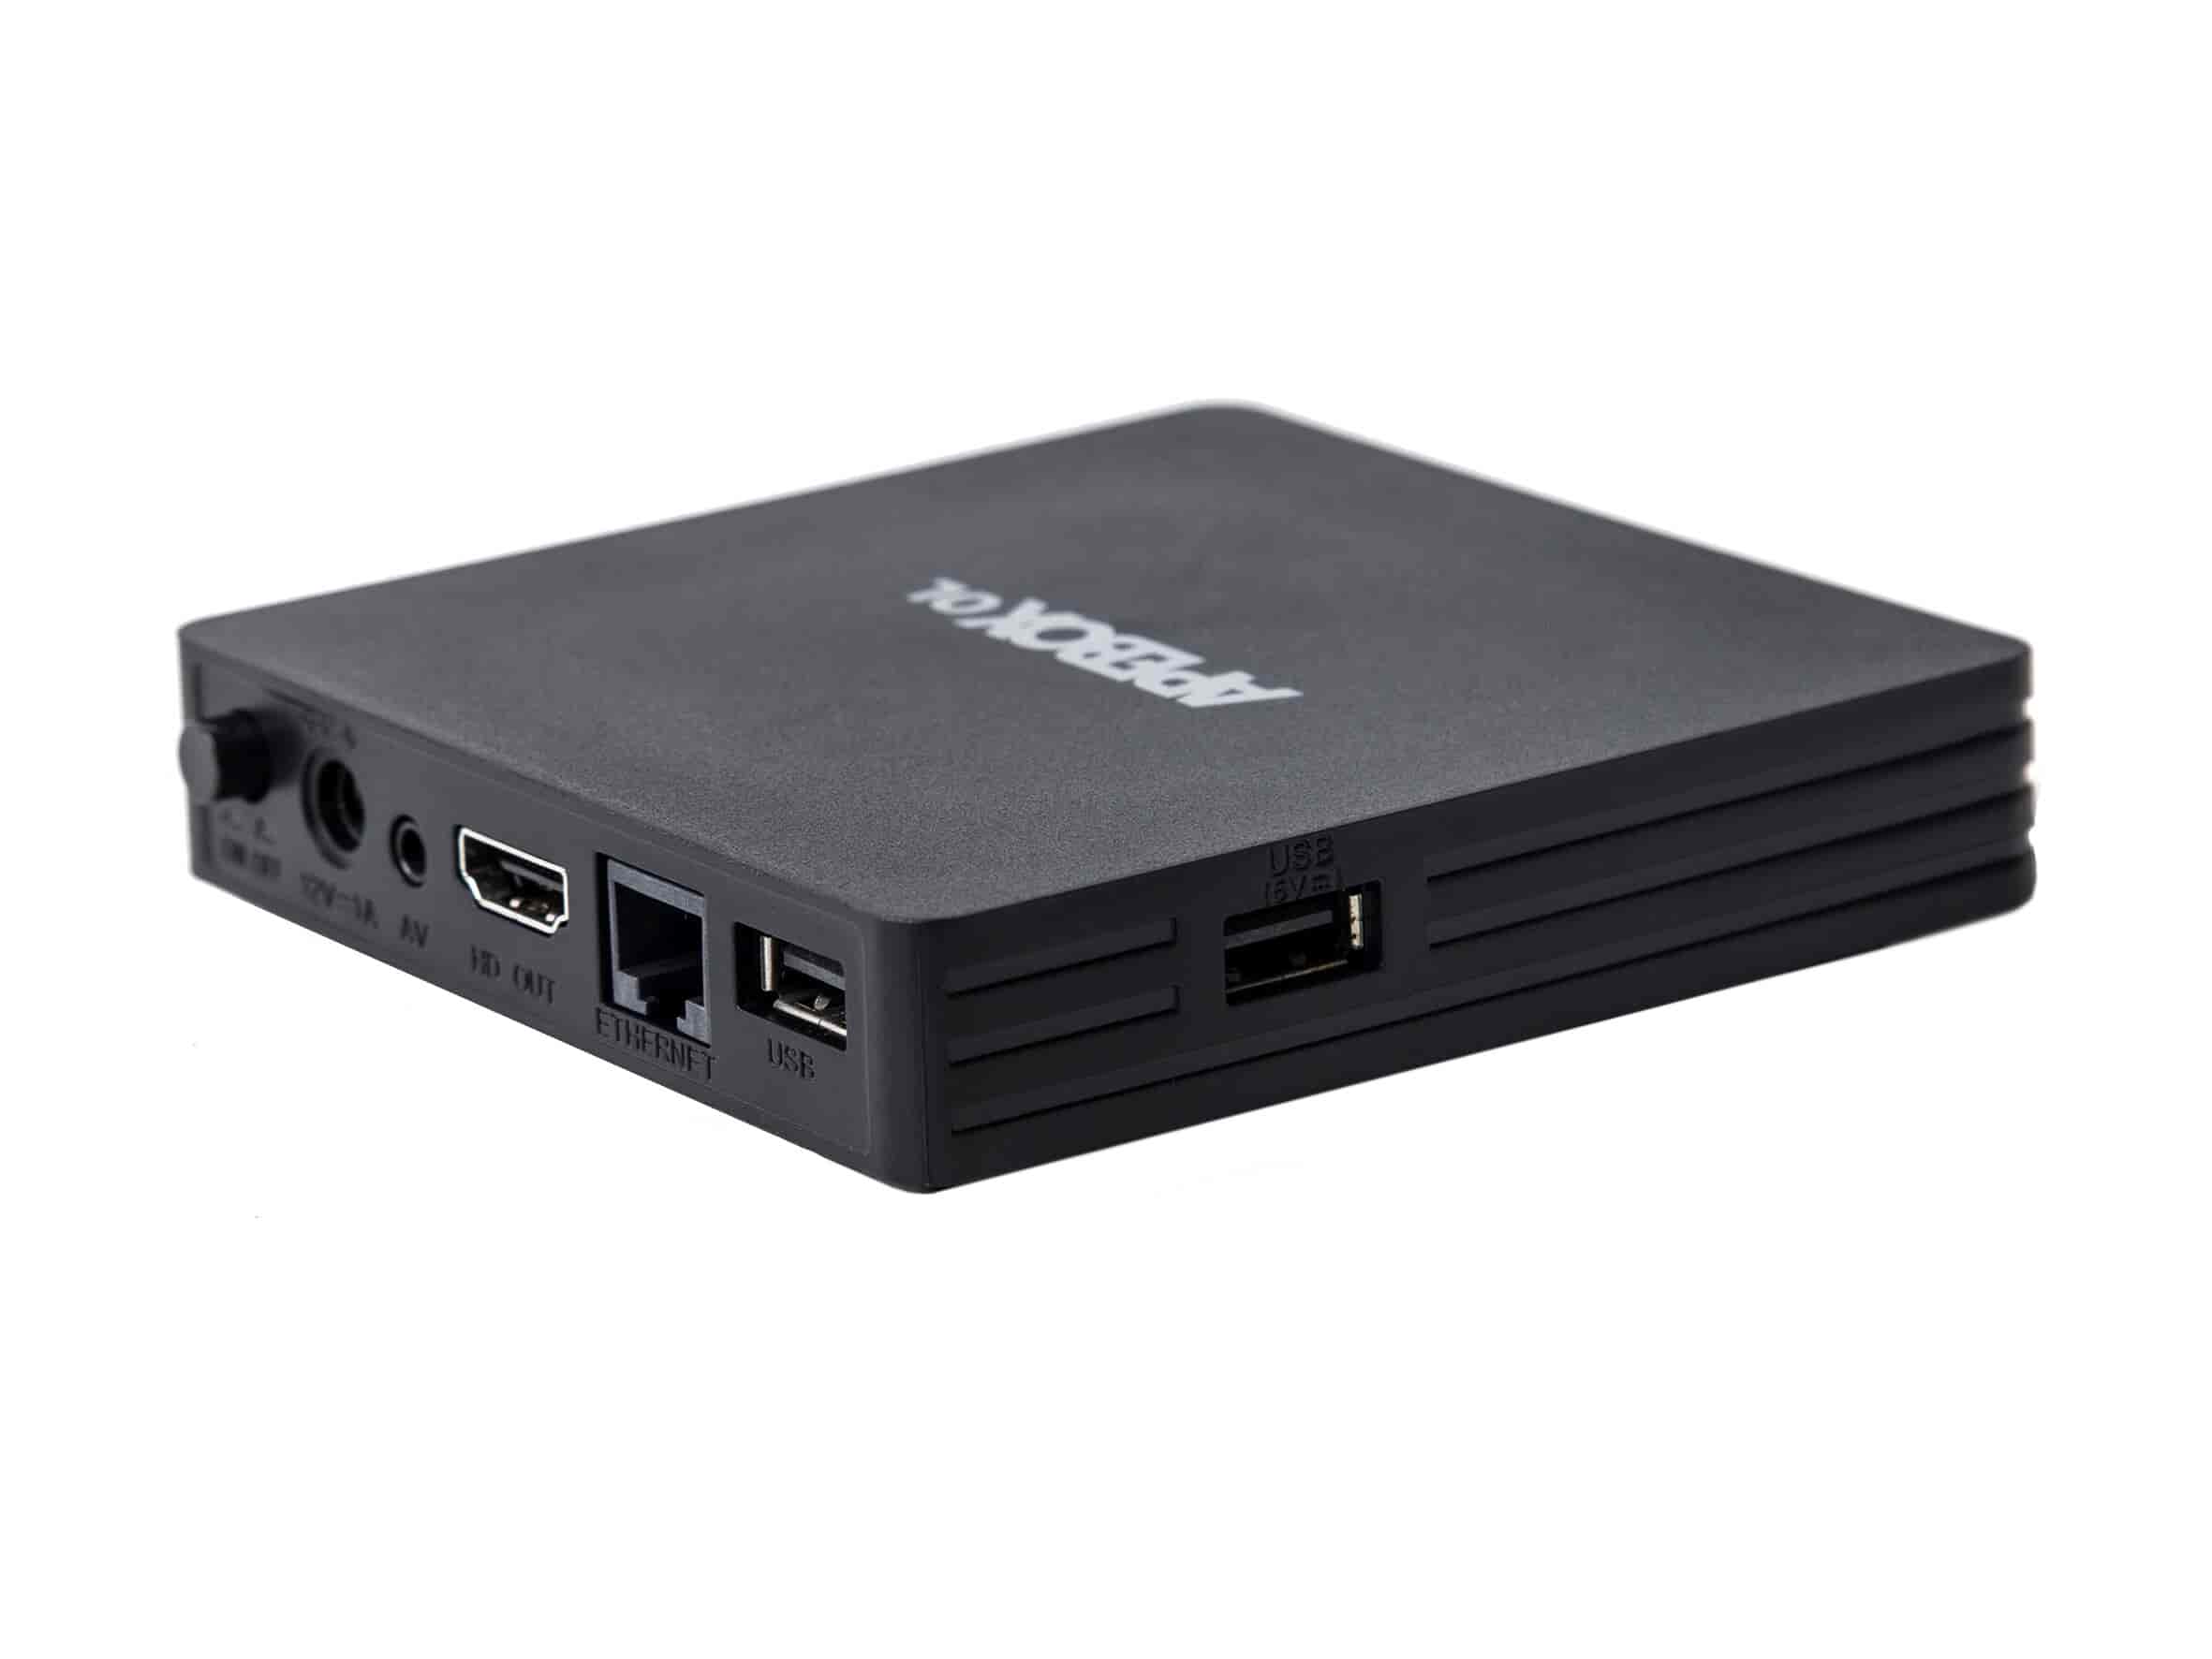 Apebox OL - 4K UHD IPTV box media streamer (Stalker, Xtream,M3U)Apebox OL IPTV is a powerful, stable, fast and user-friendly Linux OTT UHD 2160p IPTV receiver. It supports HDR10 HLG 10 bit H.265 and is ideal for those looking for a simple but effective IPTV Full 4K multimedia receiver at an affordable and absolutely fair price. Multi TV protocol allows processing of Stalker, Xtream and M3U. Dual WiFi, 100 Mbps LAN, HDR10HLG, H.265,VP9, 8 GB Flash, 1 GB DDR3, USB2.0. With a nice new easy-to-use remote control.Apebox OL effortlessly connects to a wide range of streaming services, giving you access to an extensive library of entertainment options. From popular video-on-demand platforms to live TV broadcasts, this versatile device caters to all your streaming needs, offering an extensive selection of channels and shows at your fingertips - supports Stalker, Xtream, M3U.Apebox